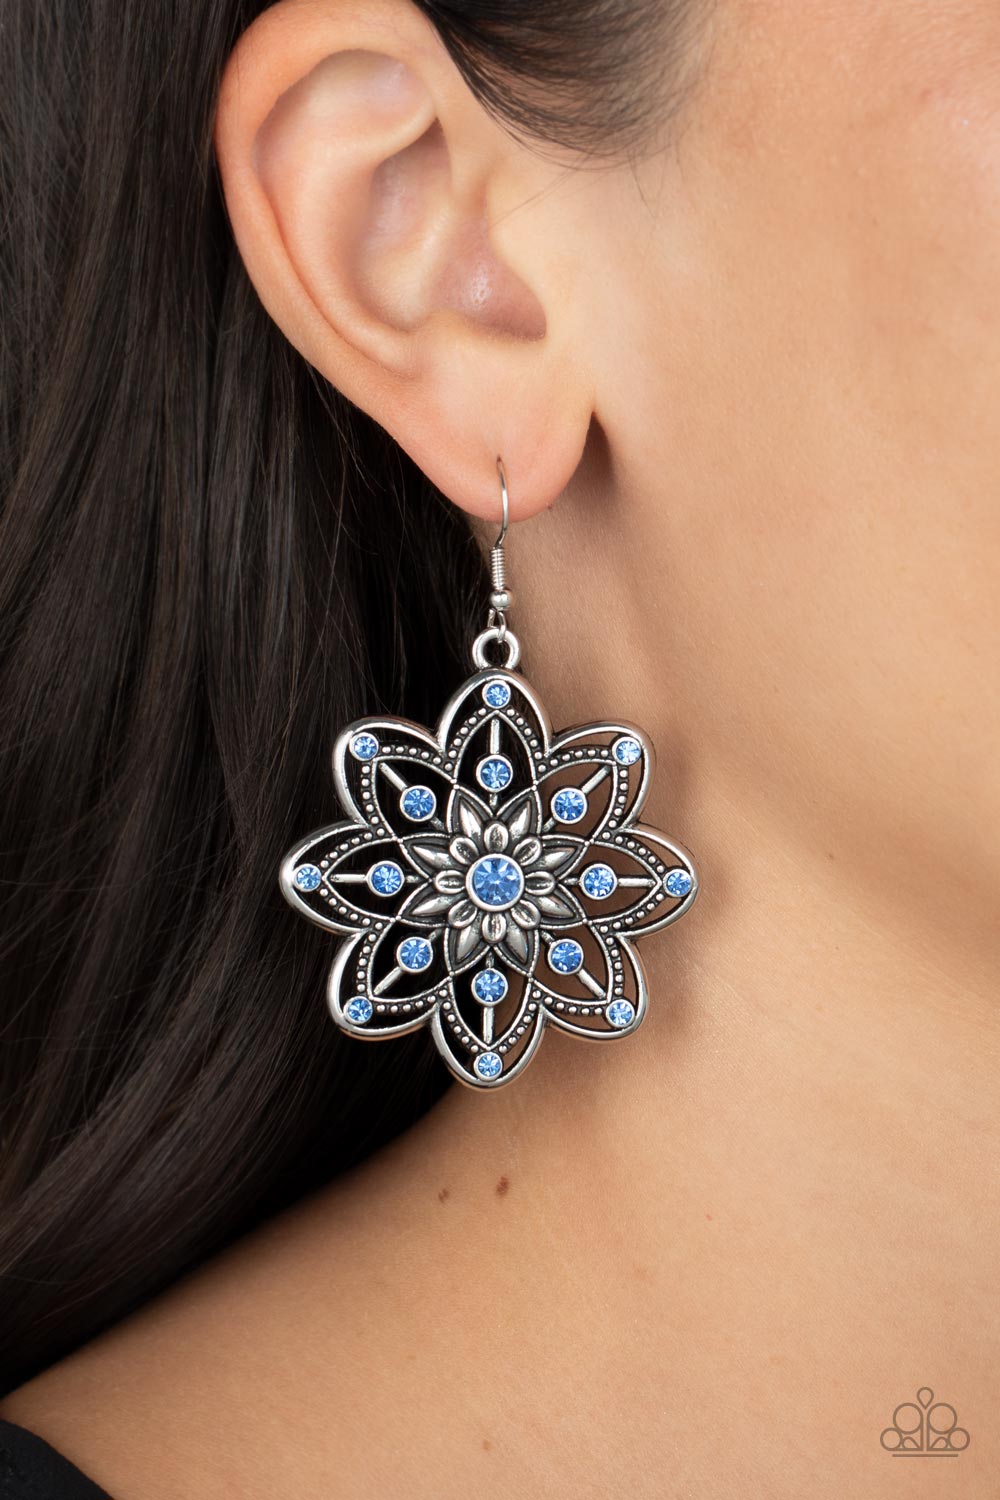 Prismatic Perennial Blue Rhinestone Earrings - Paparazzi Accessories- on model - CarasShop.com - $5 Jewelry by Cara Jewels